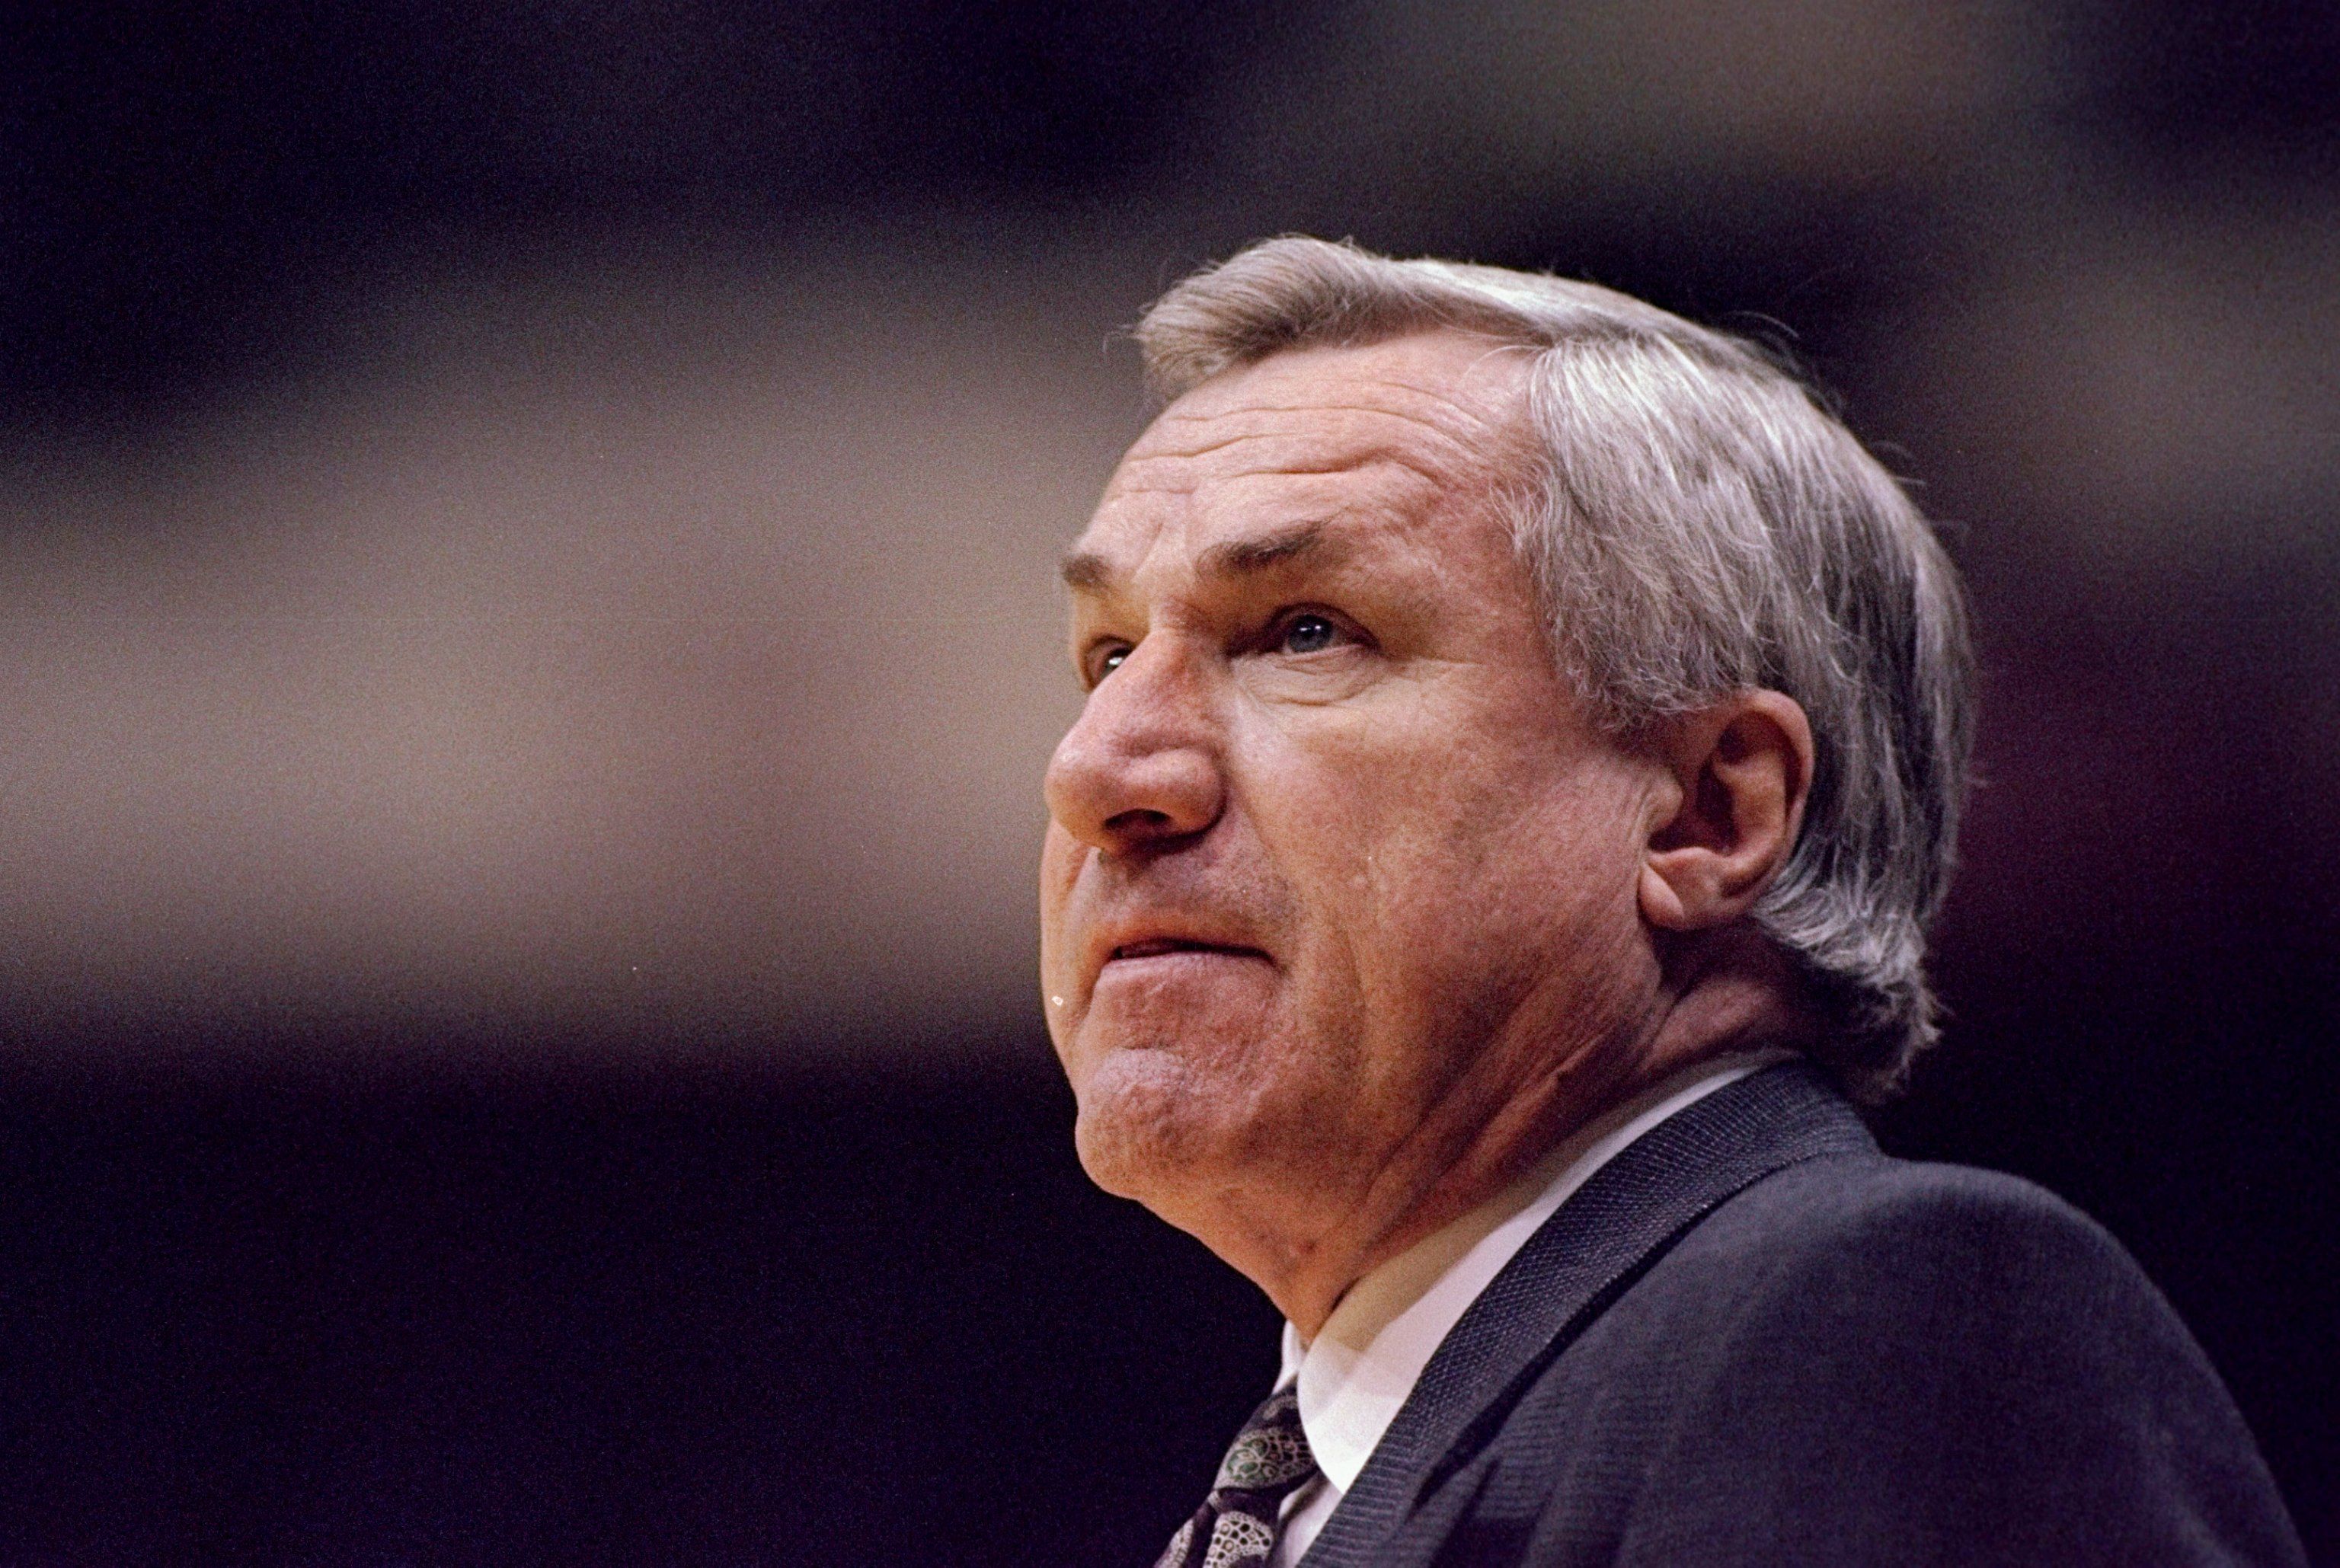 Dean Smith looks up at the scoreboard.